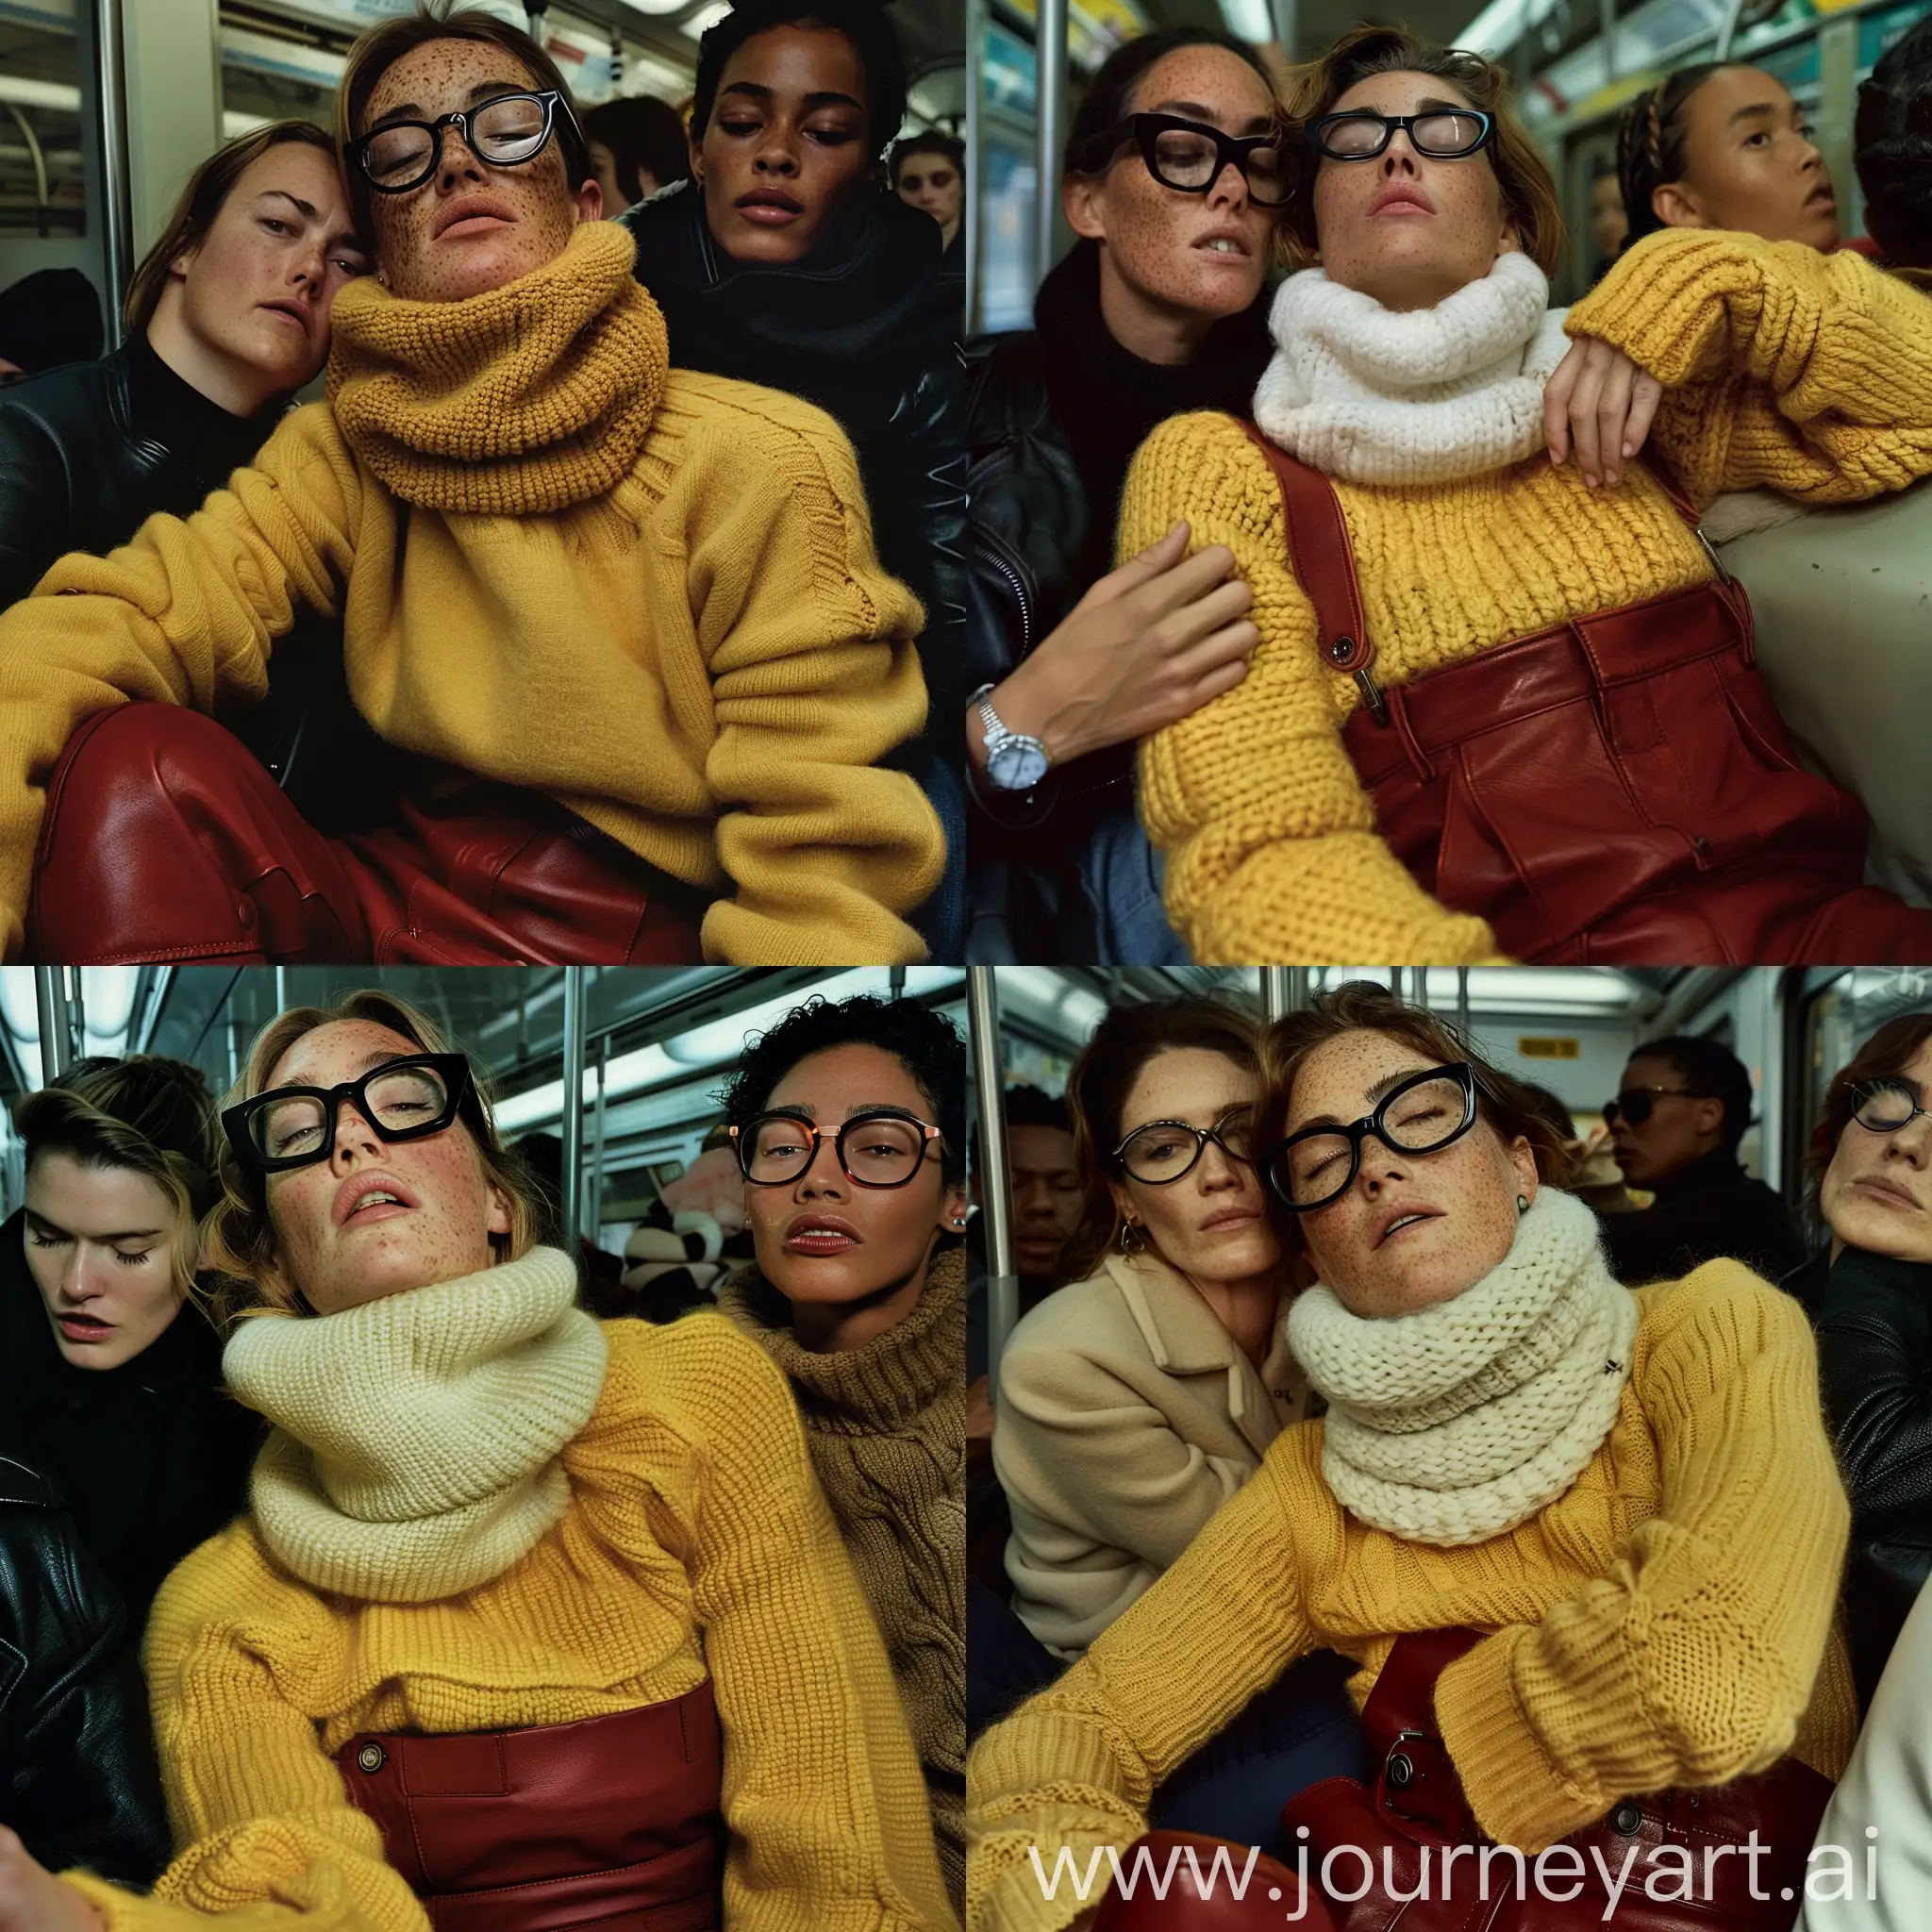 Urban-Chic-Relaxed-Kate-Winslet-and-Playful-Turtleneck-Encounter